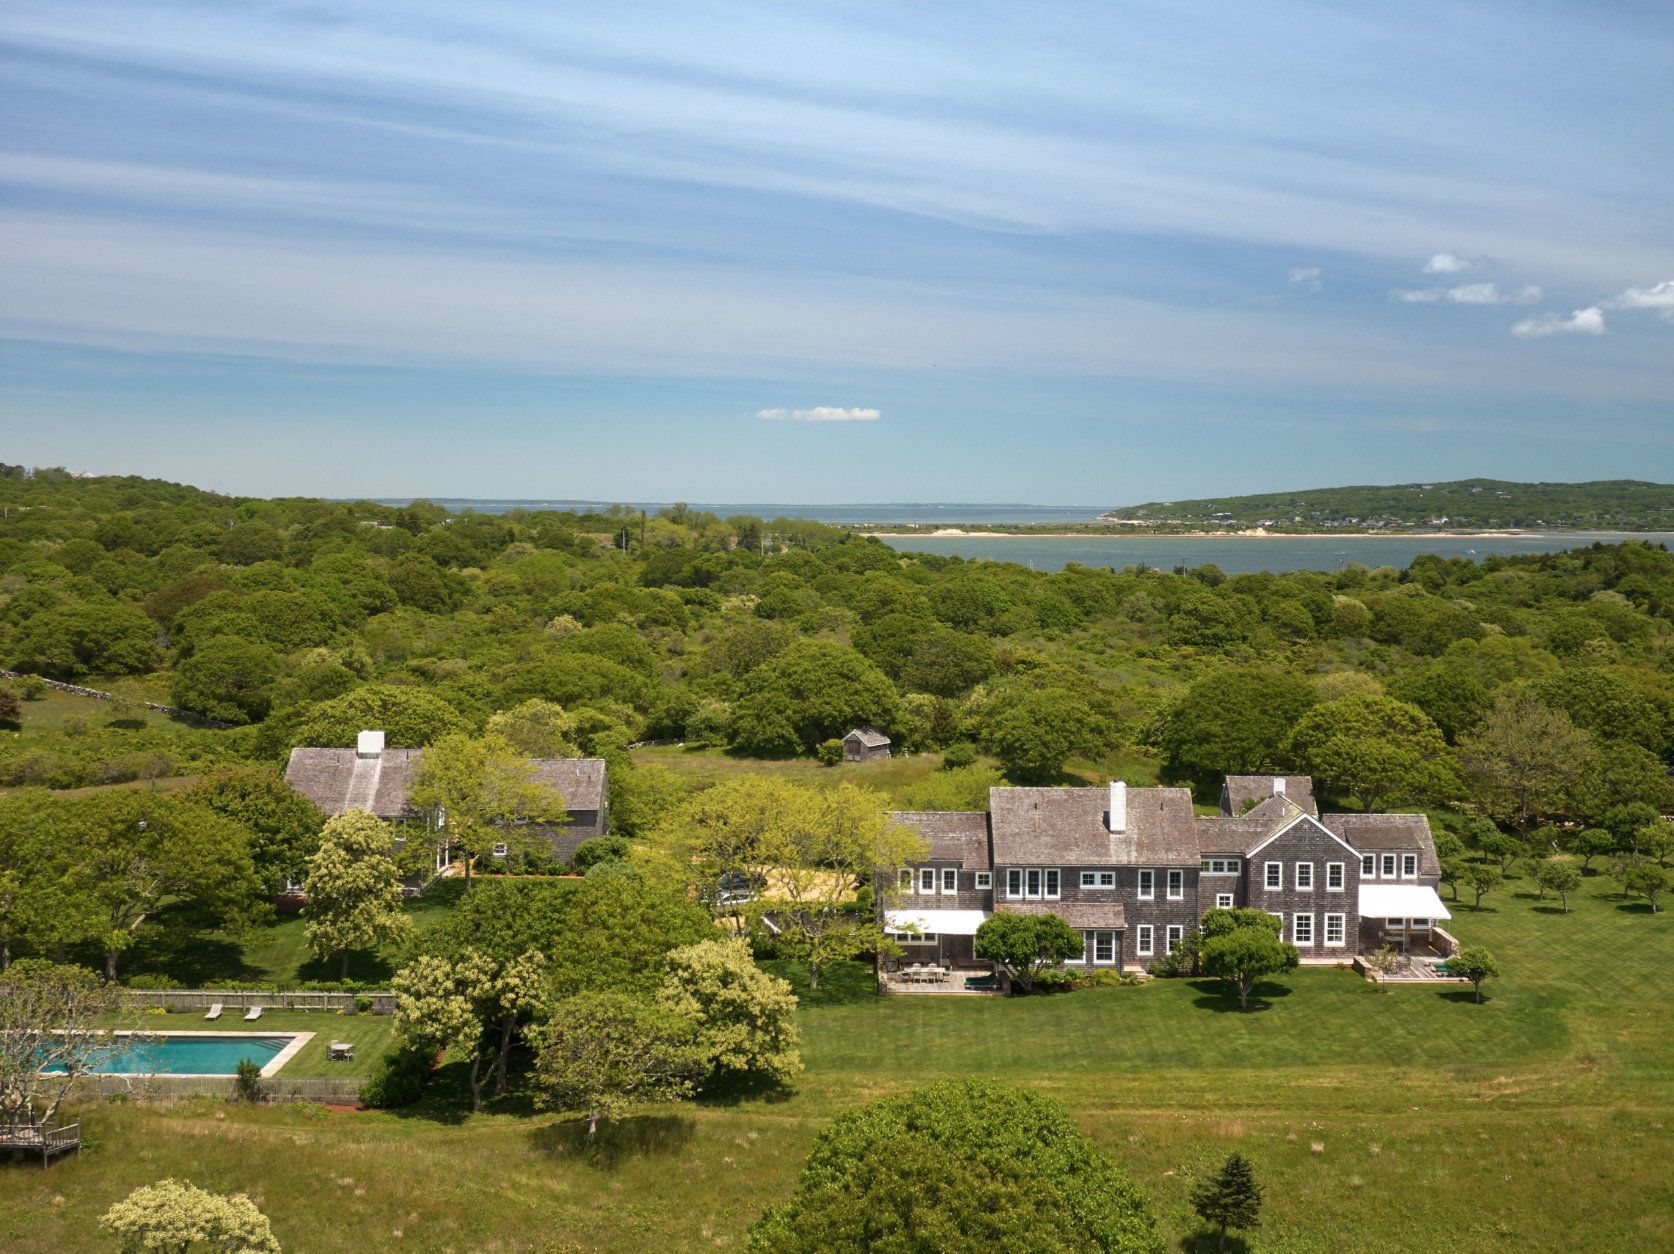 The 6,456-square-foot cedar-shingled main residence has five en-suite bedrooms, two half baths, a chef’s kitchen equipped with professional grade appliances, two offices or artist studios. Three fireplaces warm the home, and outdoor decks drink in the serene water and nature views with the dunes in the distance. (Laura Moss Photography)